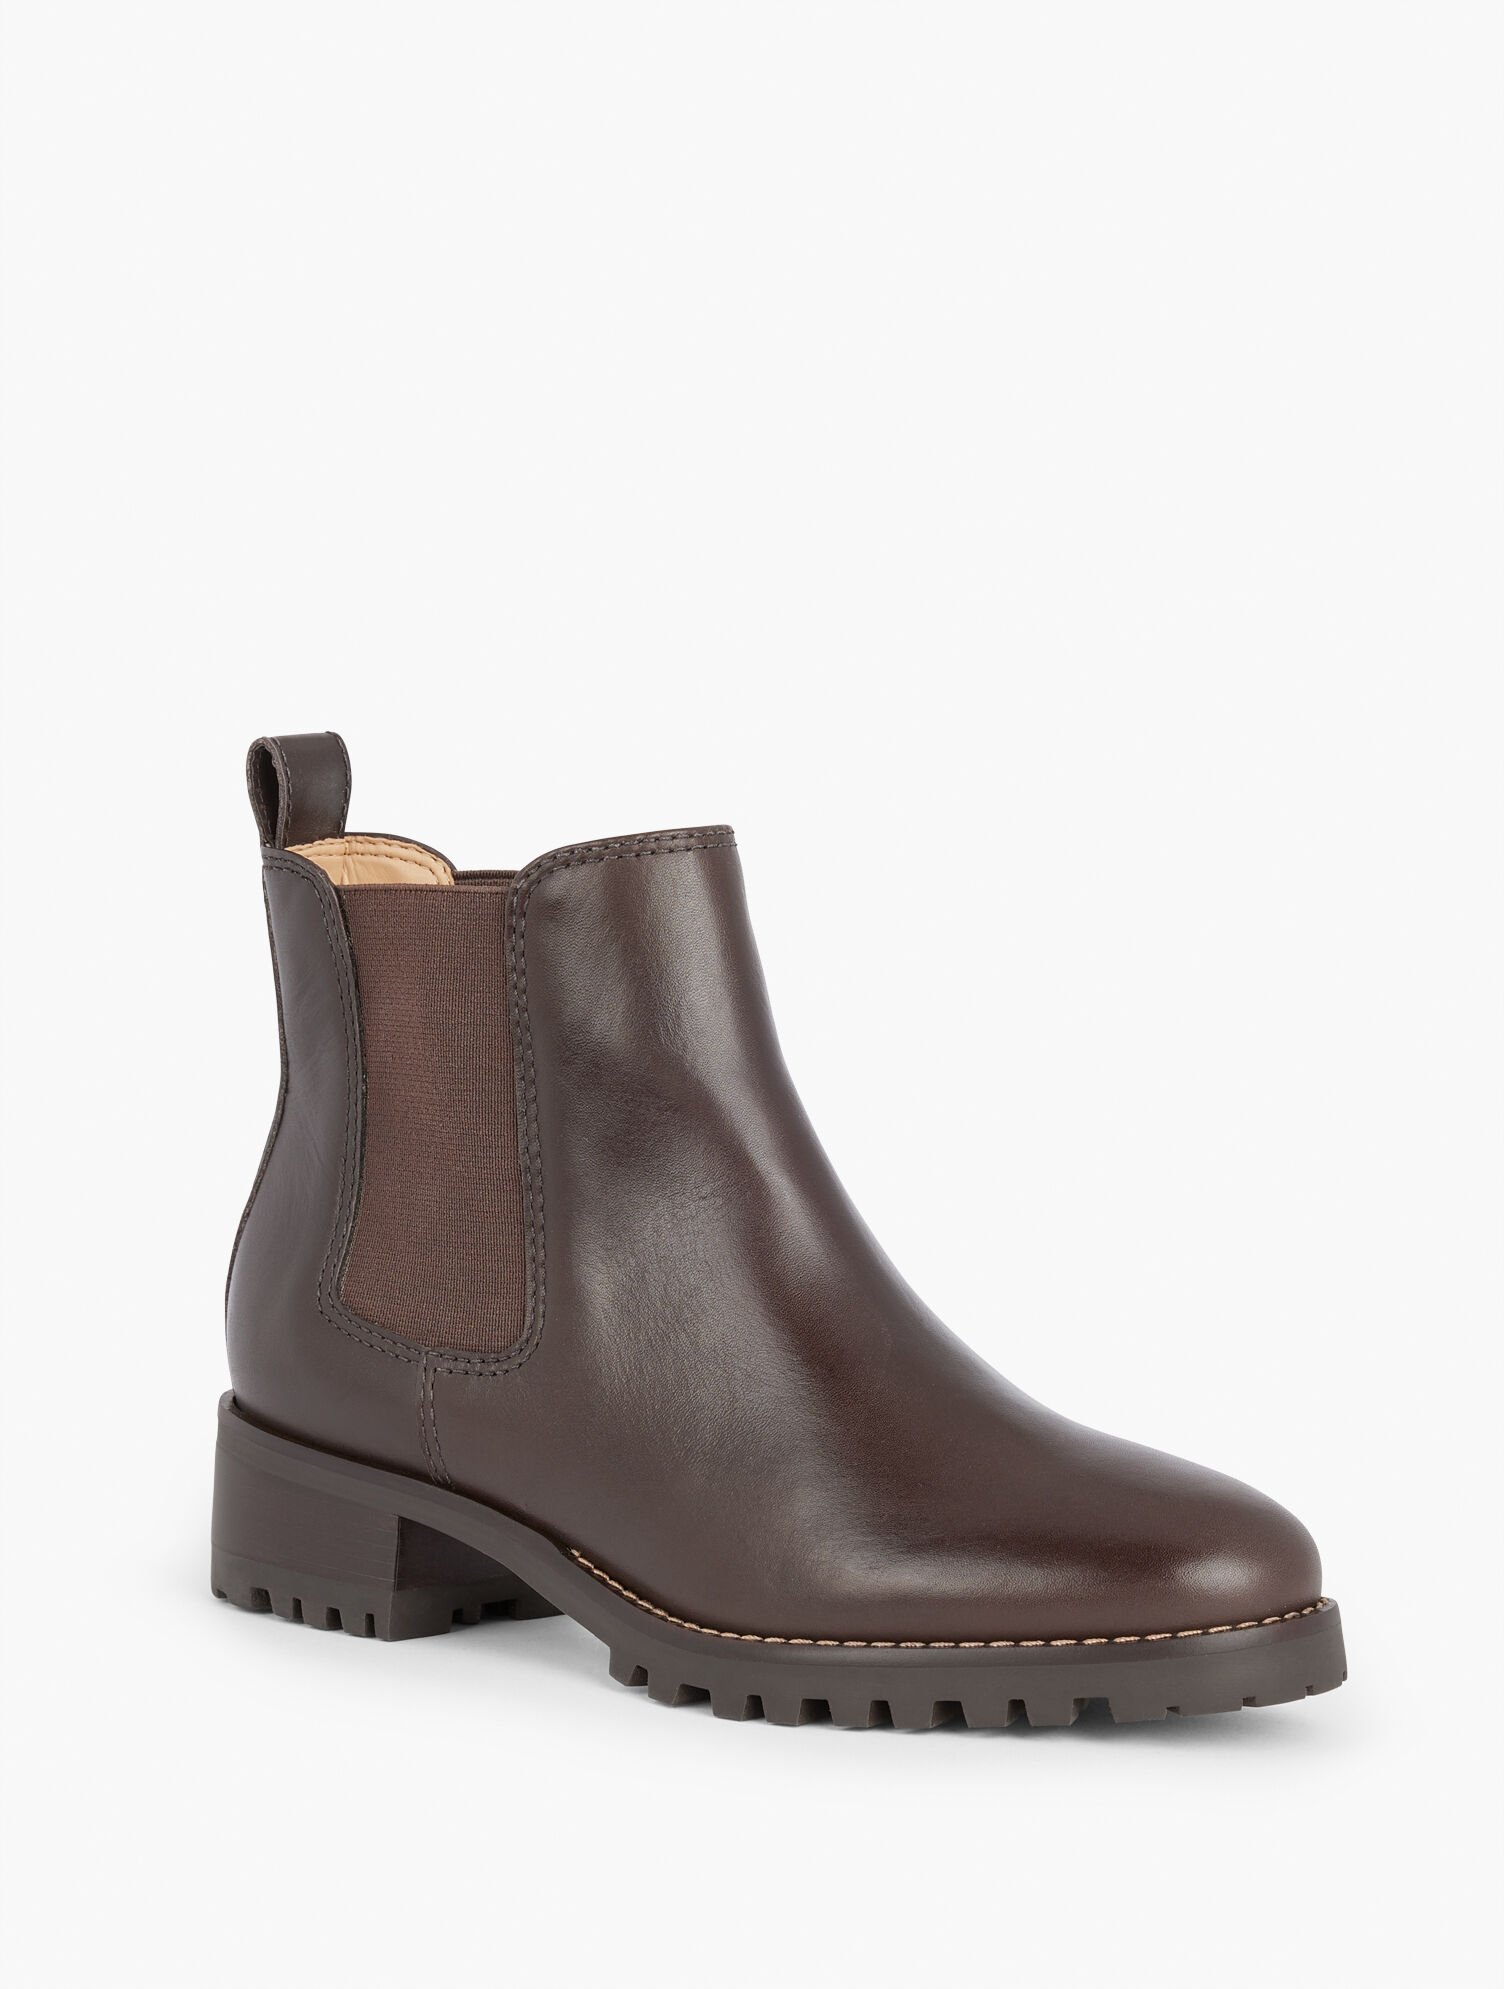 Tish Chelsea Boots - Pebbled Leather | Talbots